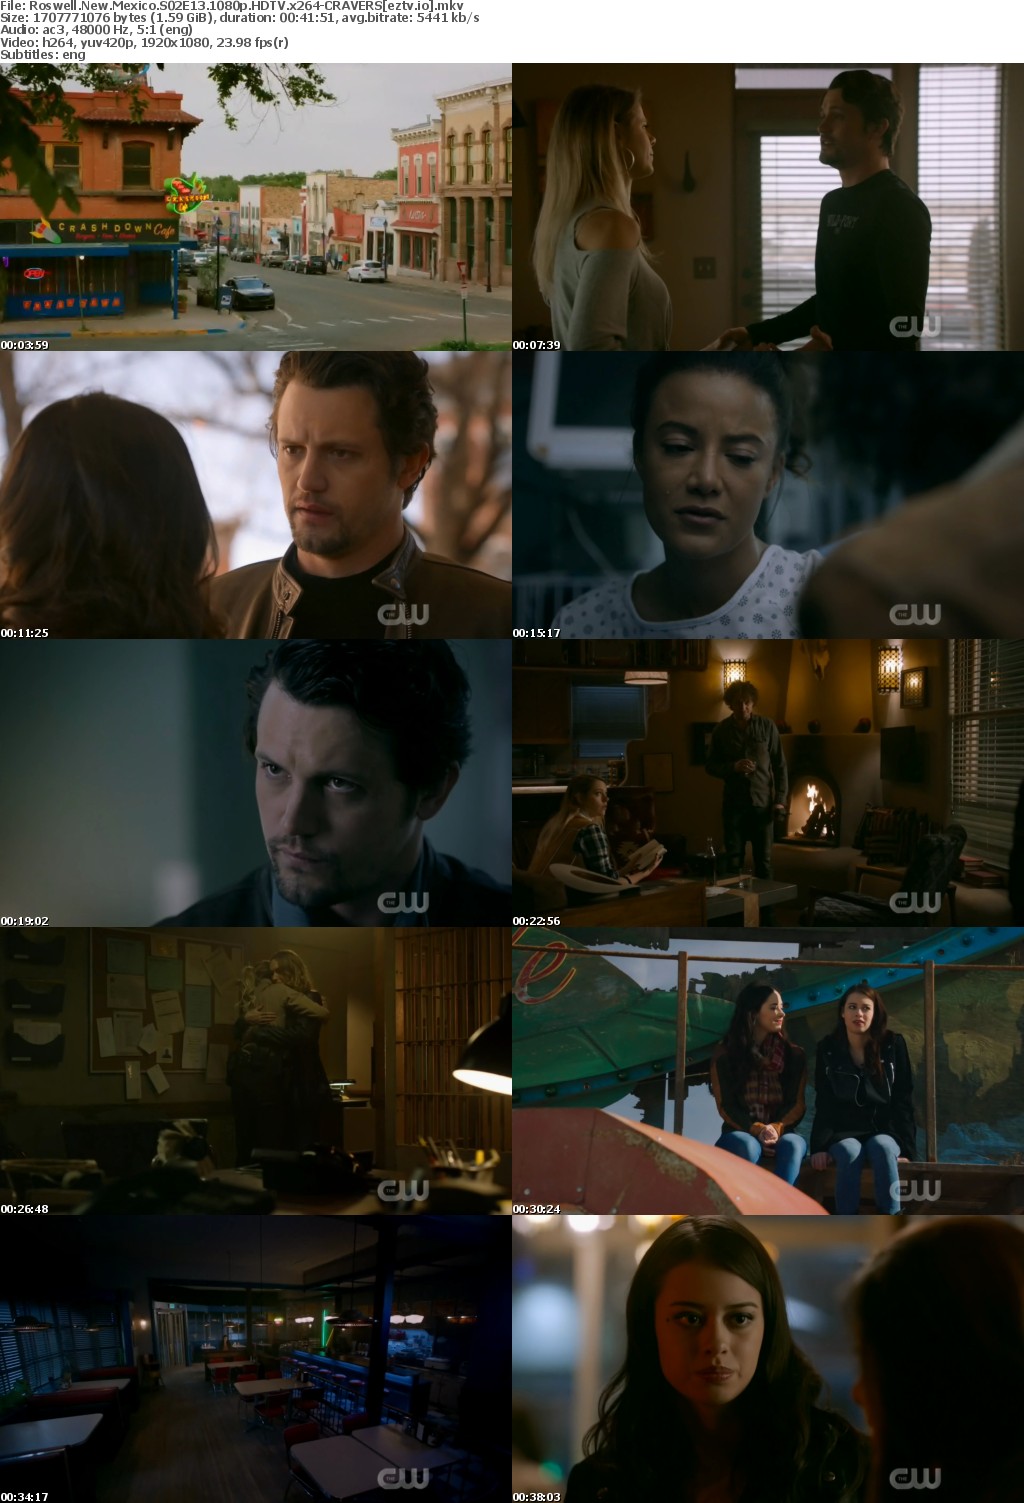 Roswell New Mexico S02E13 1080p HDTV x264-CRAVERS